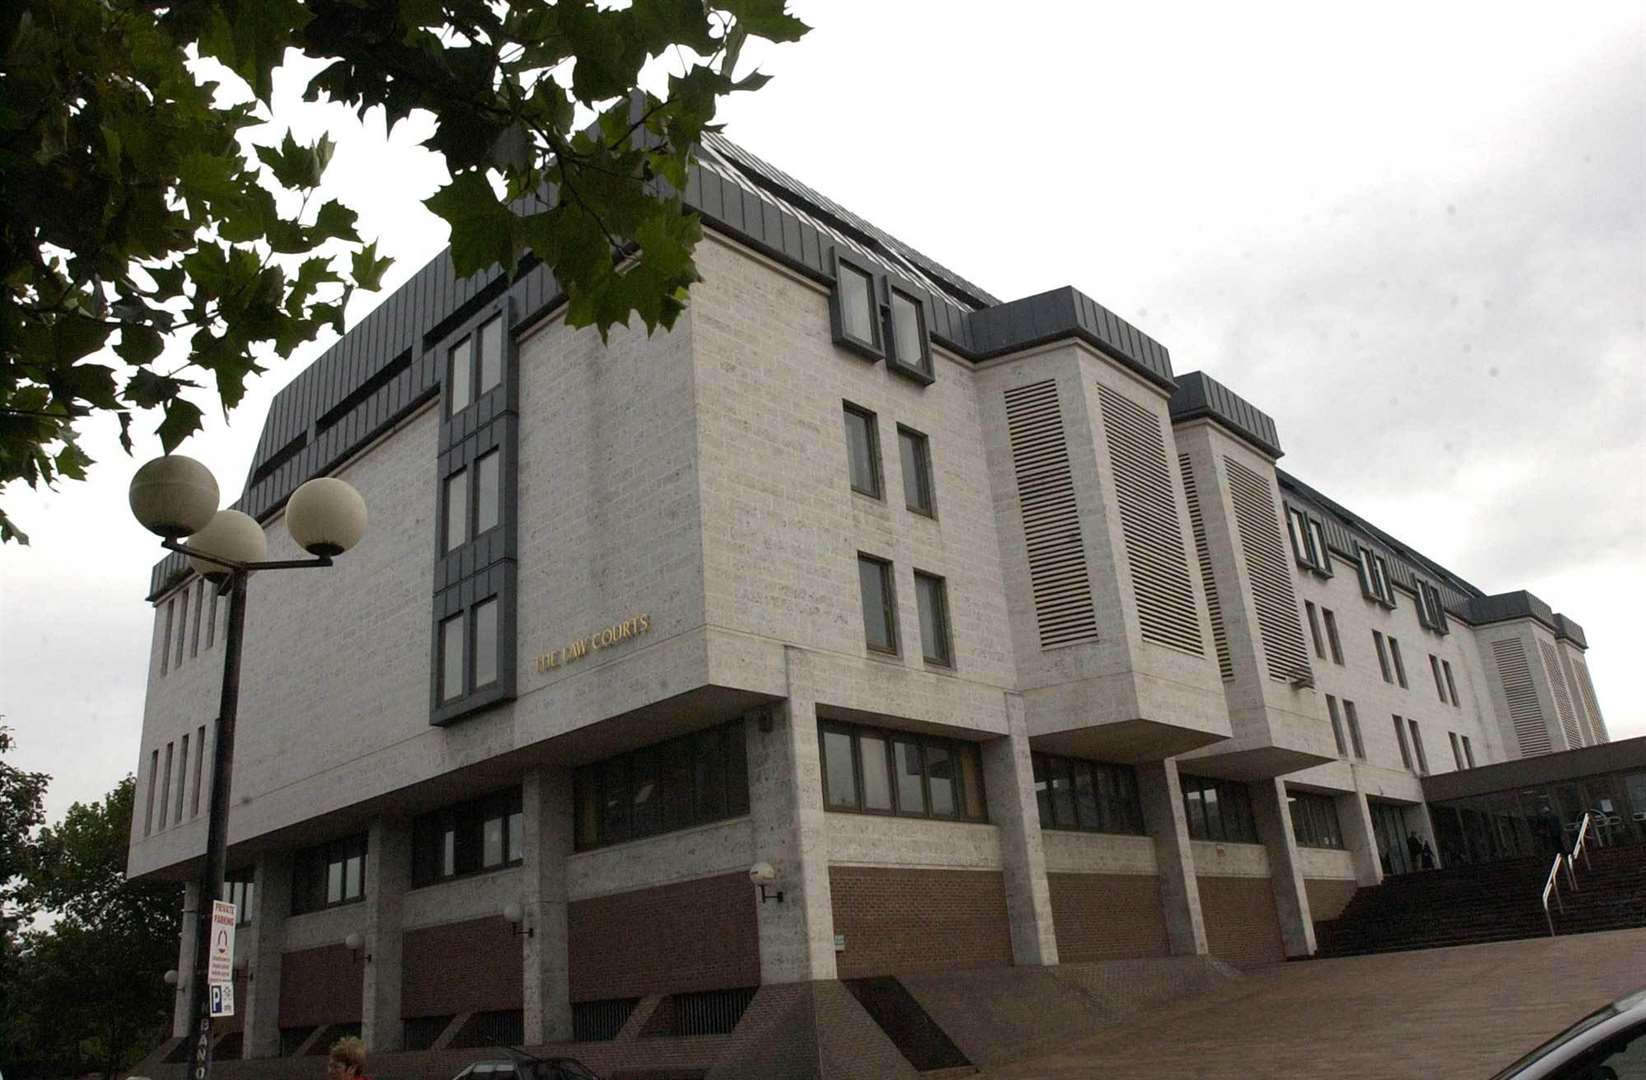 The trial was heard at Maidstone Crown Court